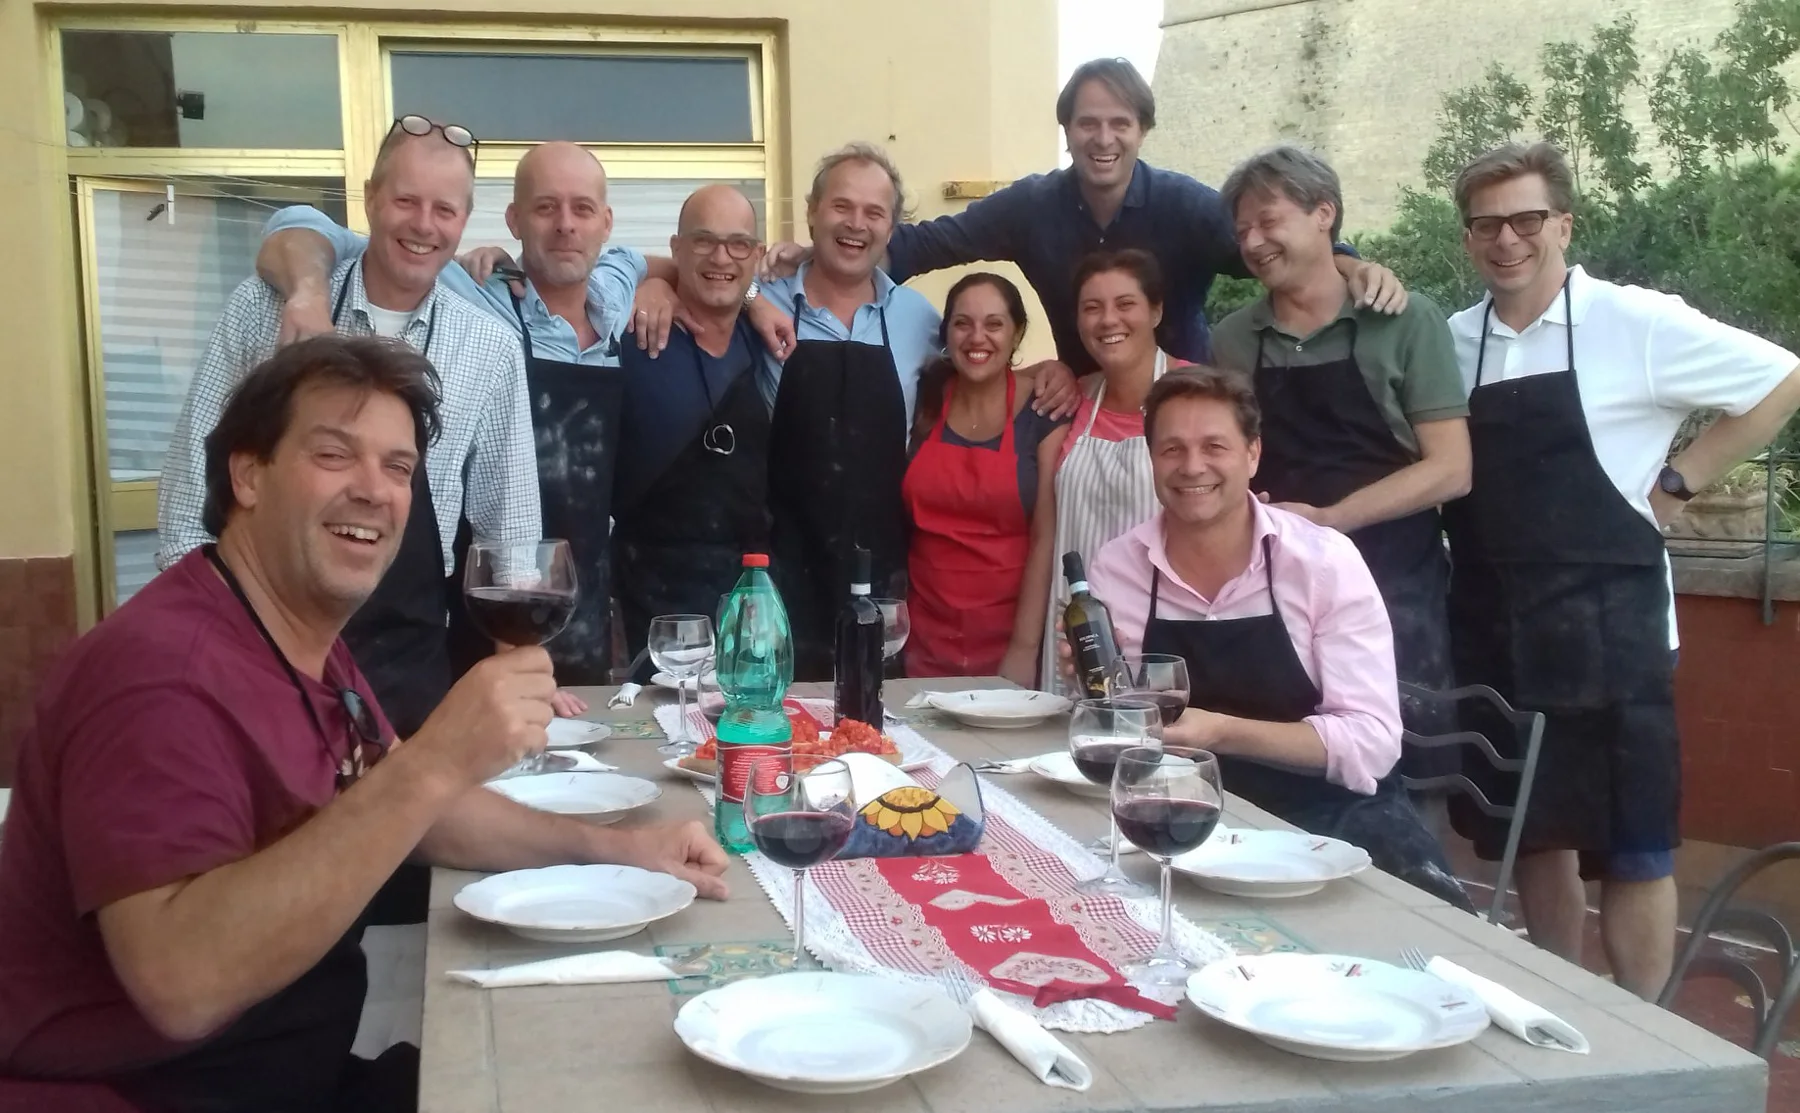 Pizza making class and Dinner in a real Neapolitan pizzeria - 1389715